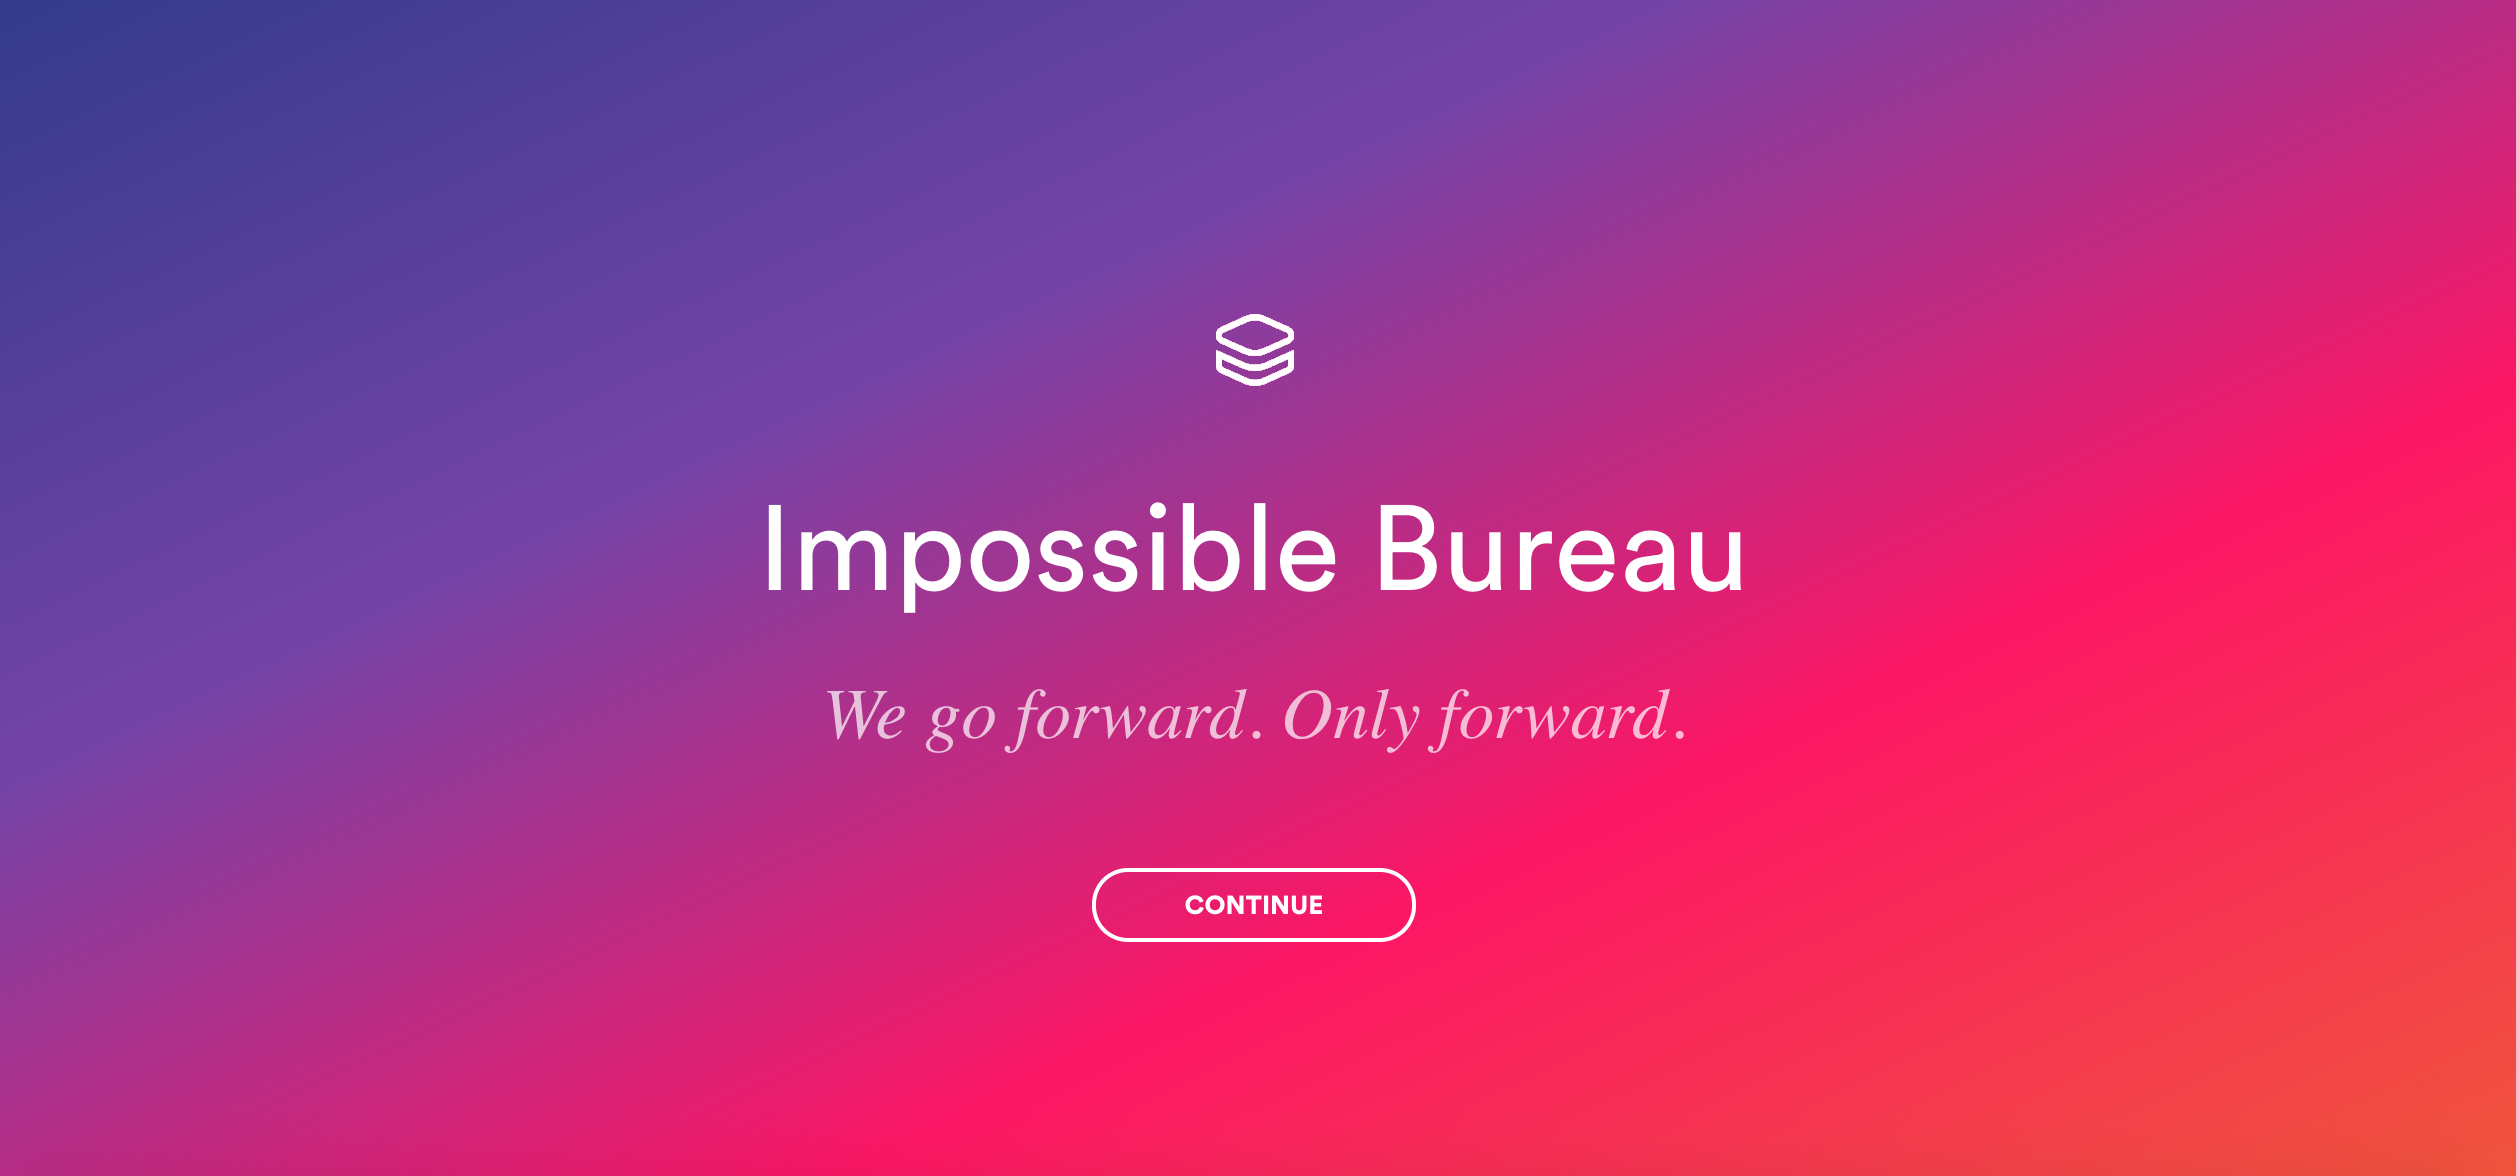 animated website background with gradient